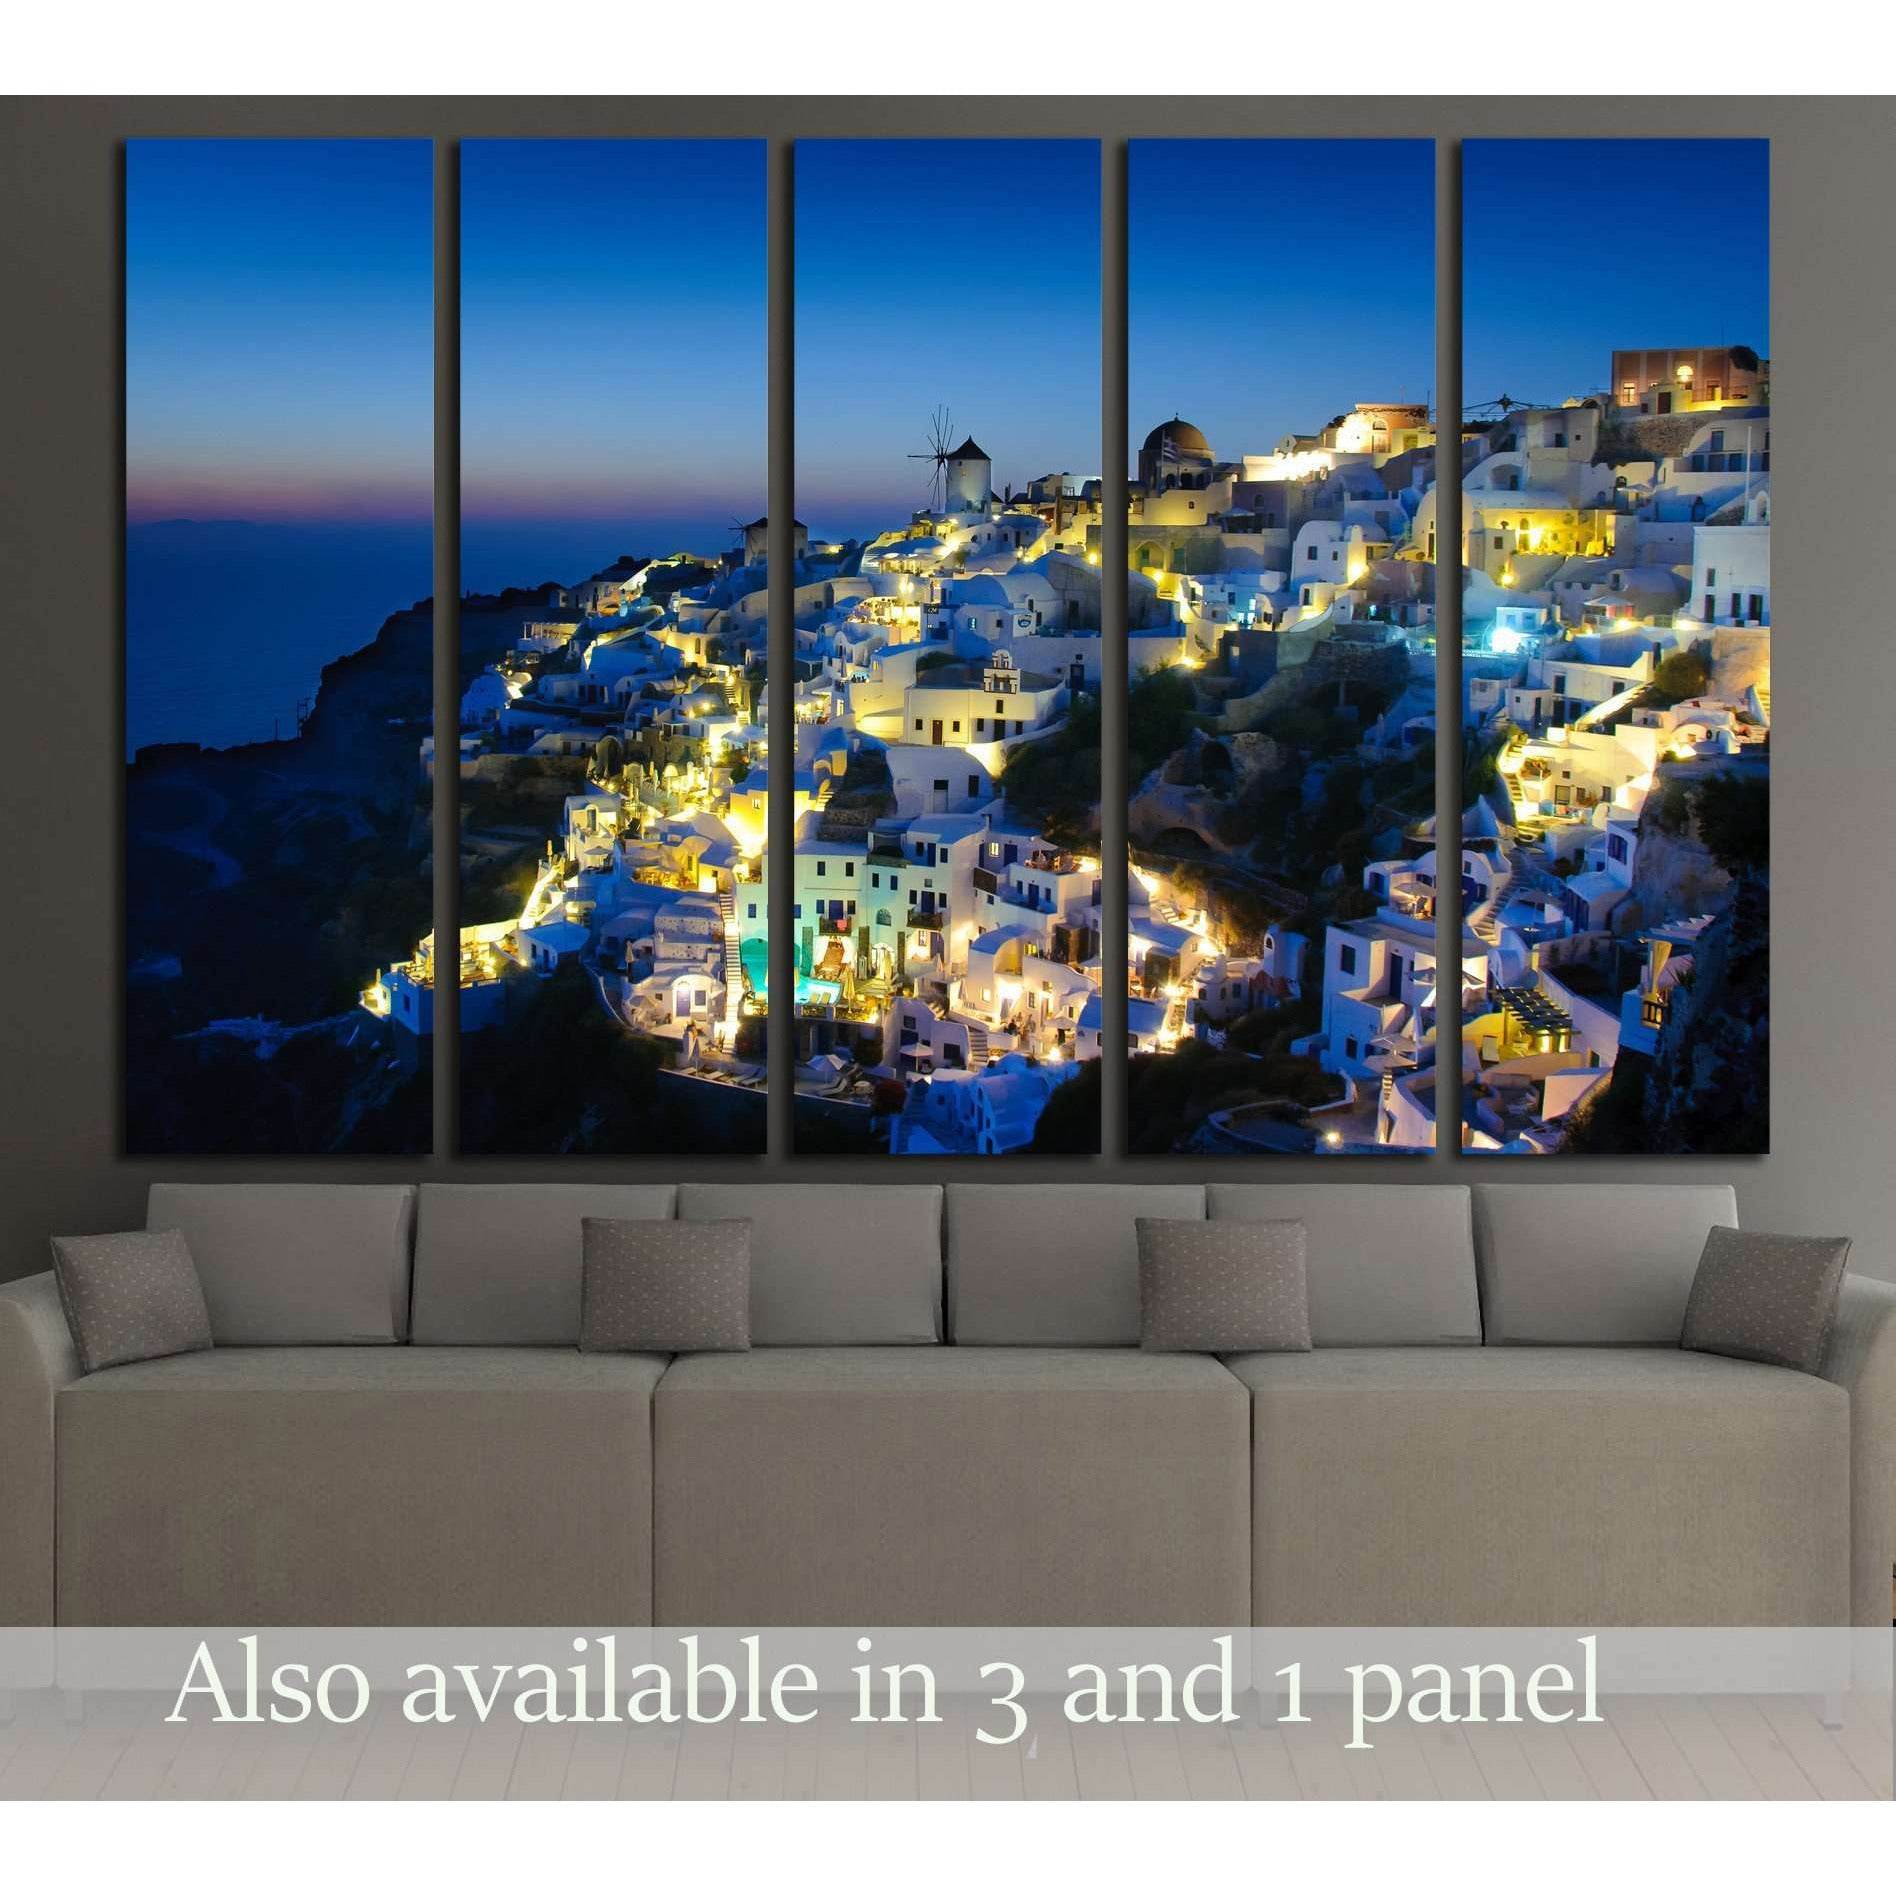 Oia village in Santorini at in the evening, Greece №2242 Ready to Hang Canvas Print